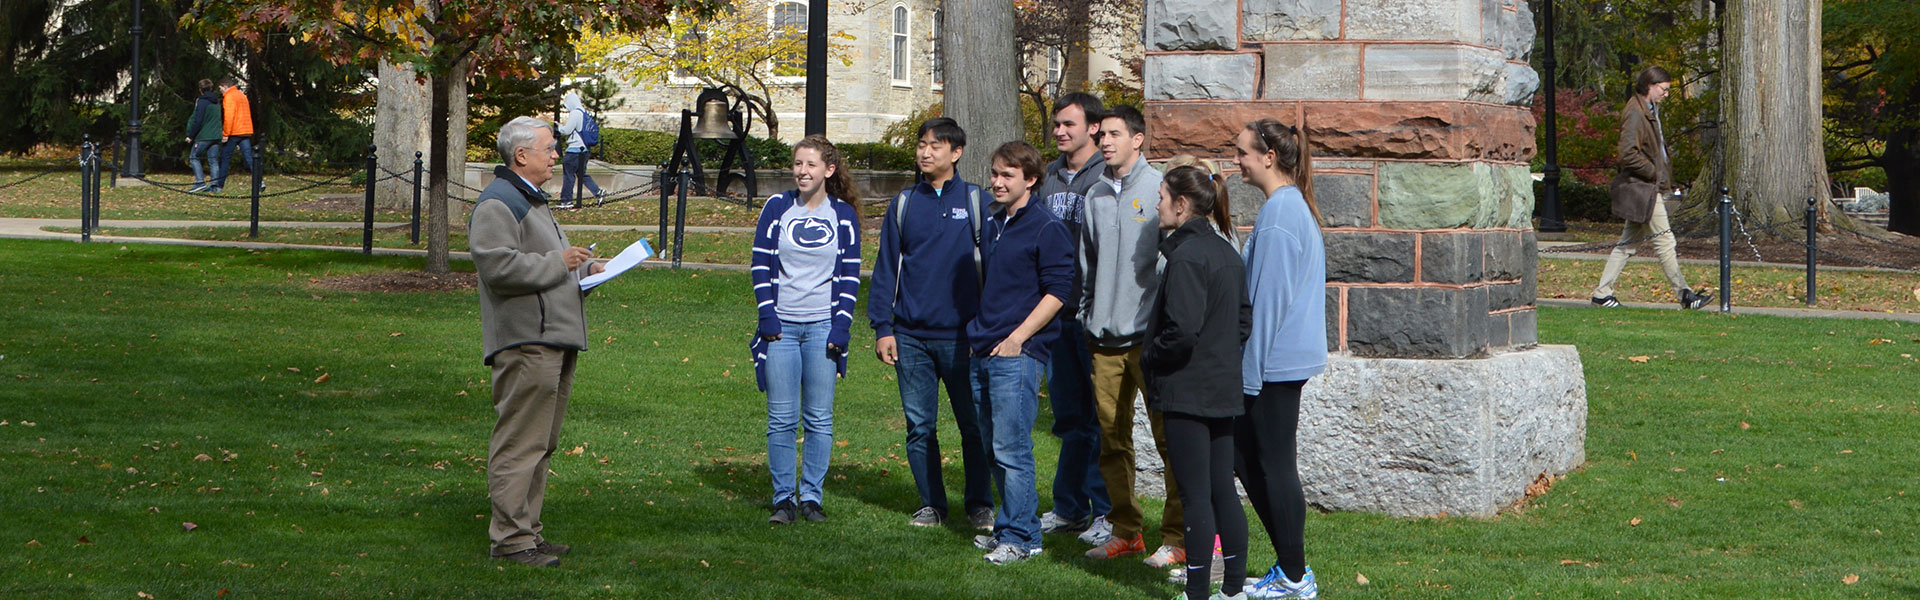 Nels Shirer with a group of students outside